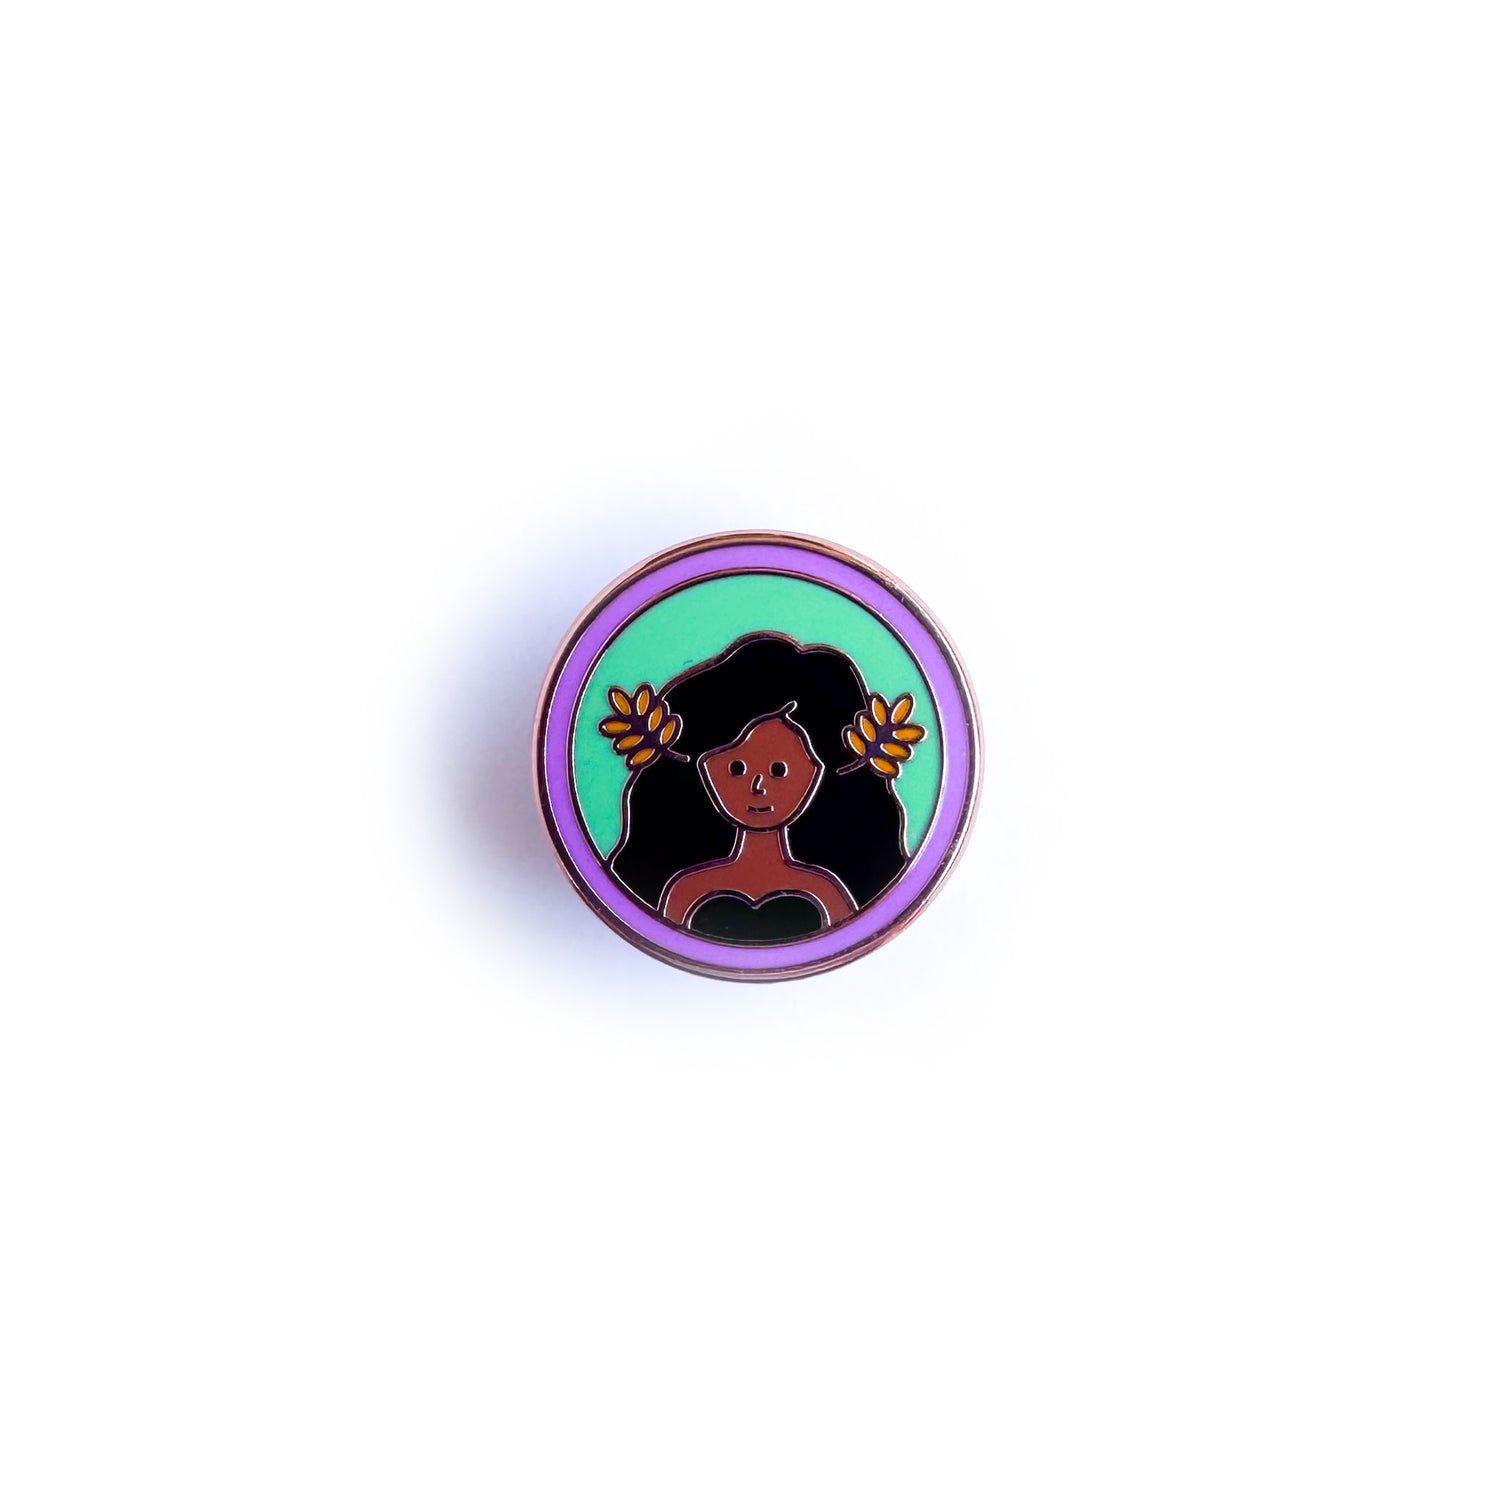 An enamel pin of a woman with brown skin with flowing brown hair with wheat fronds in it. She is in a green circle surrounded by a lavender circle. 